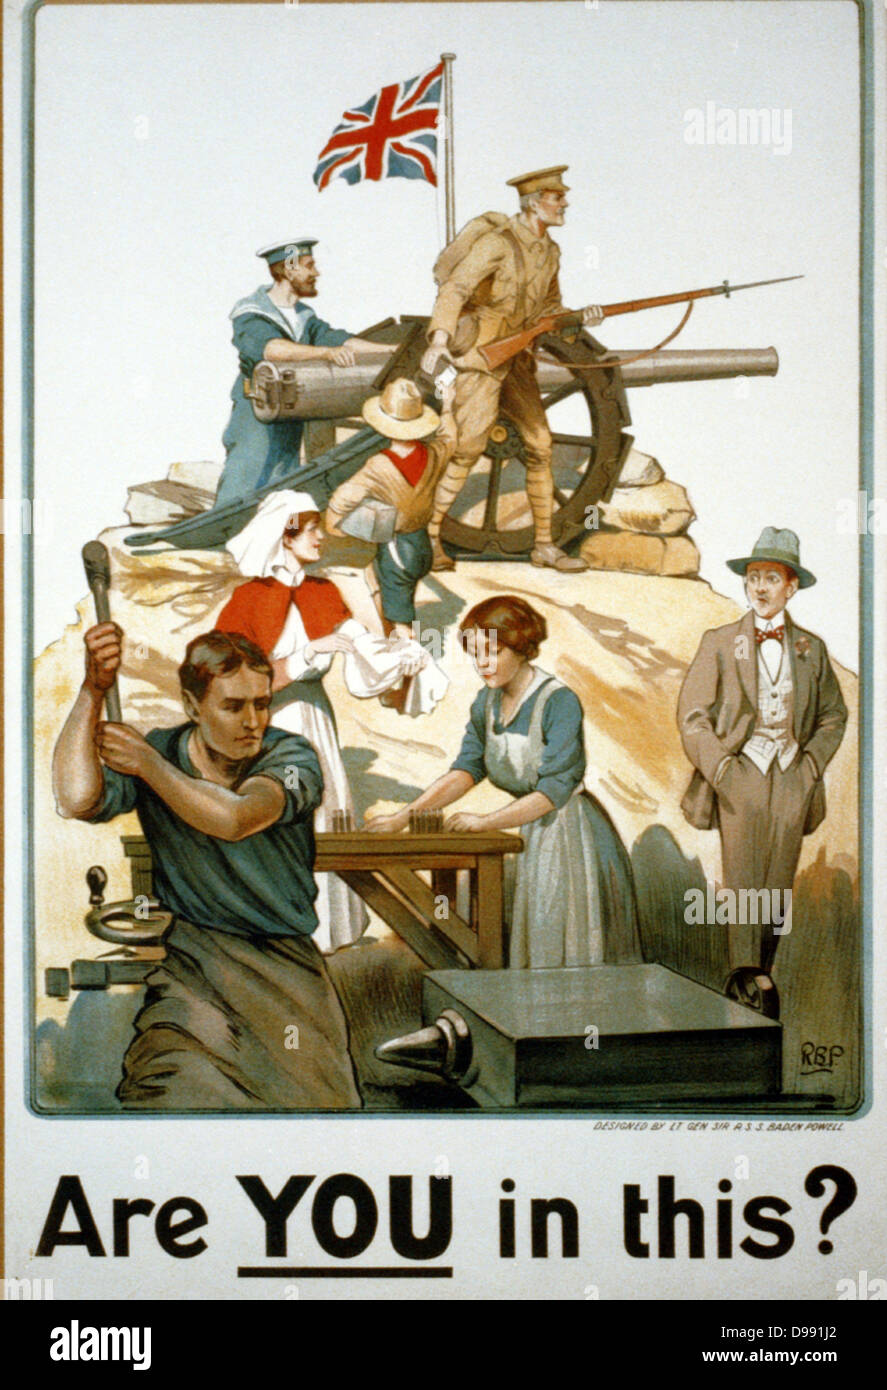 British, World War I Poster, 1917, designed by Robert Baden-Powell, encouraging everyone to contribute to the war effort. 'Are you in this?' Factory worker, female munitions worker, Nurse, Boy Scout supporting the Army and Navy. Stock Photo